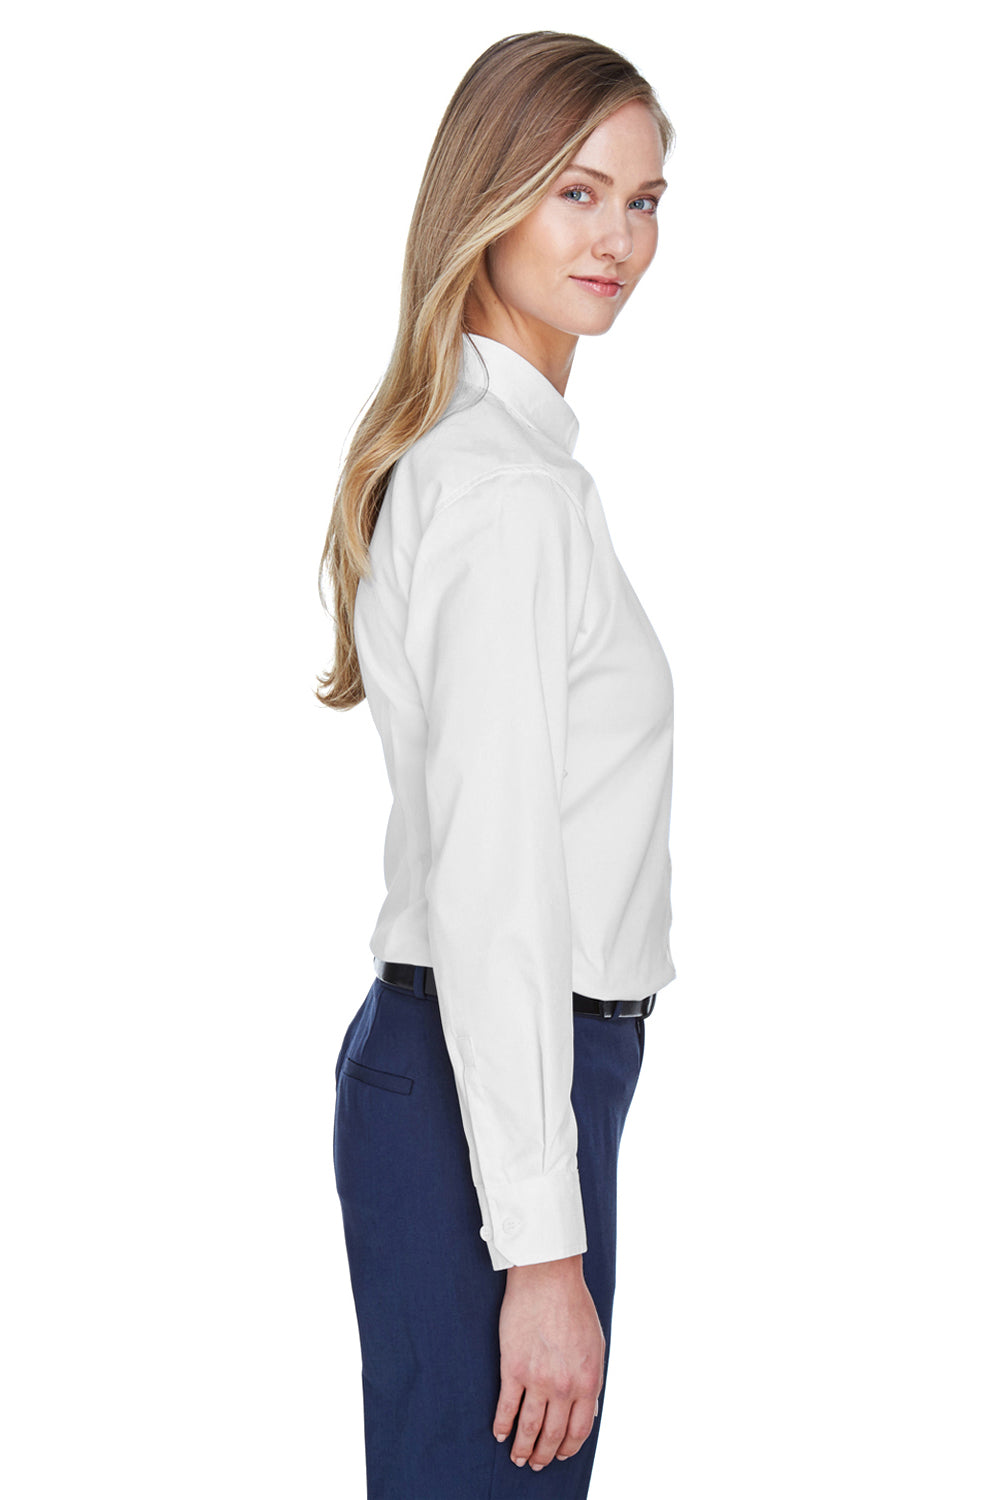 Core 365 78193 Womens Operate Long Sleeve Button Down Shirt White Side